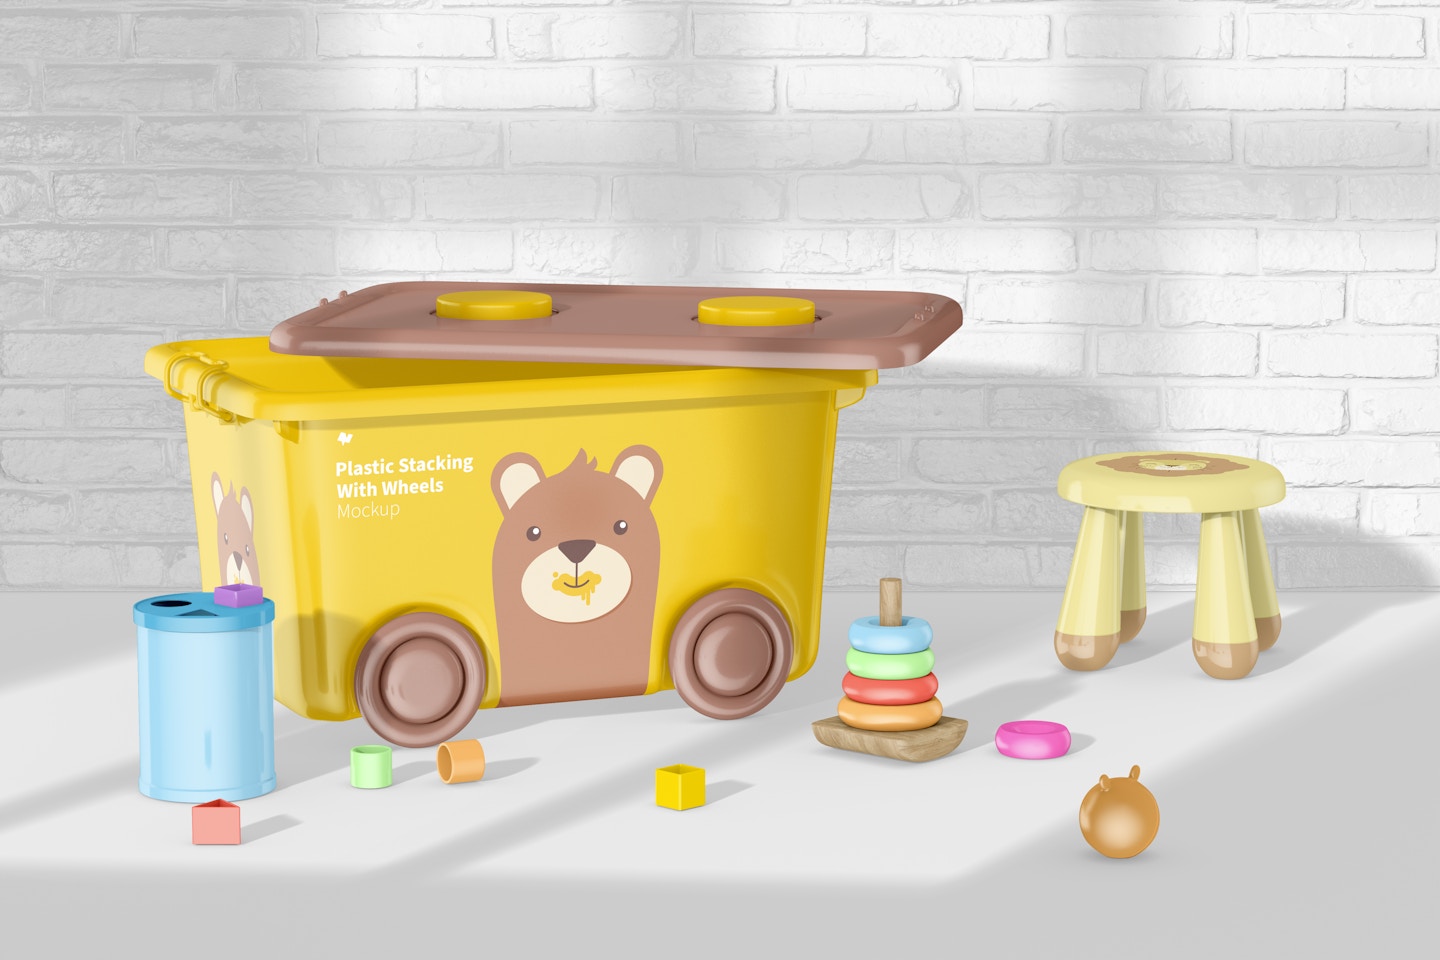 Plastic Stacking Bin with Wheels Mockup, Perspective